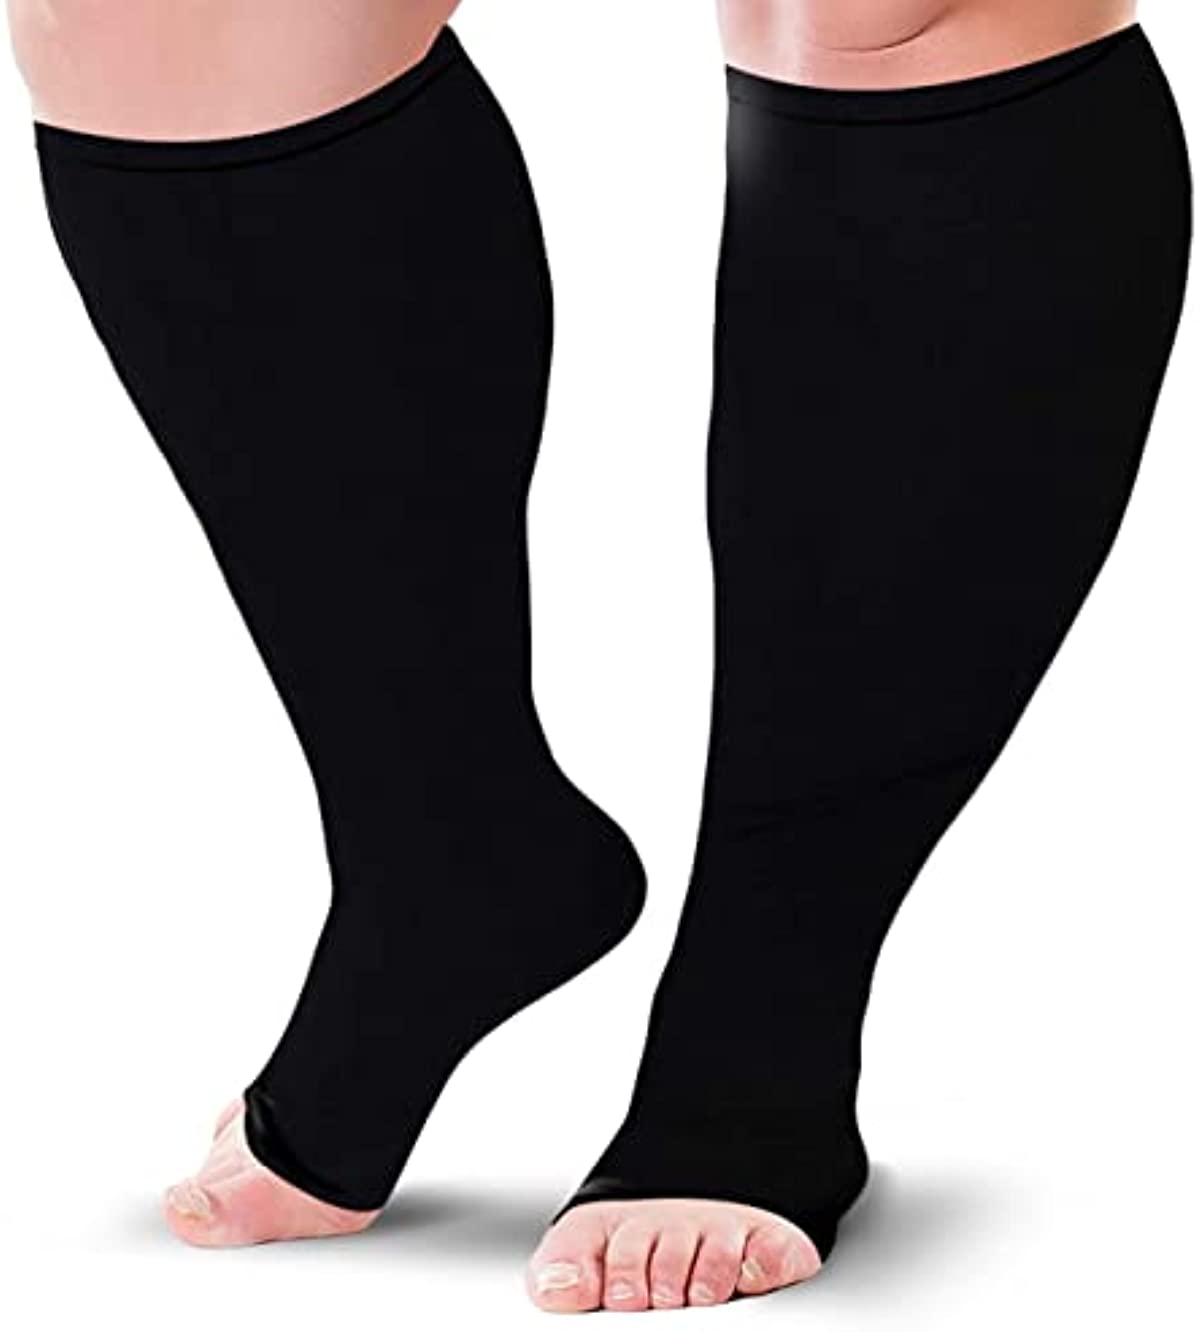 BLU HORN Knee High Open Toe Compression Stockings 20-30 mmHg - Everyday Use (2X-Large, Black)